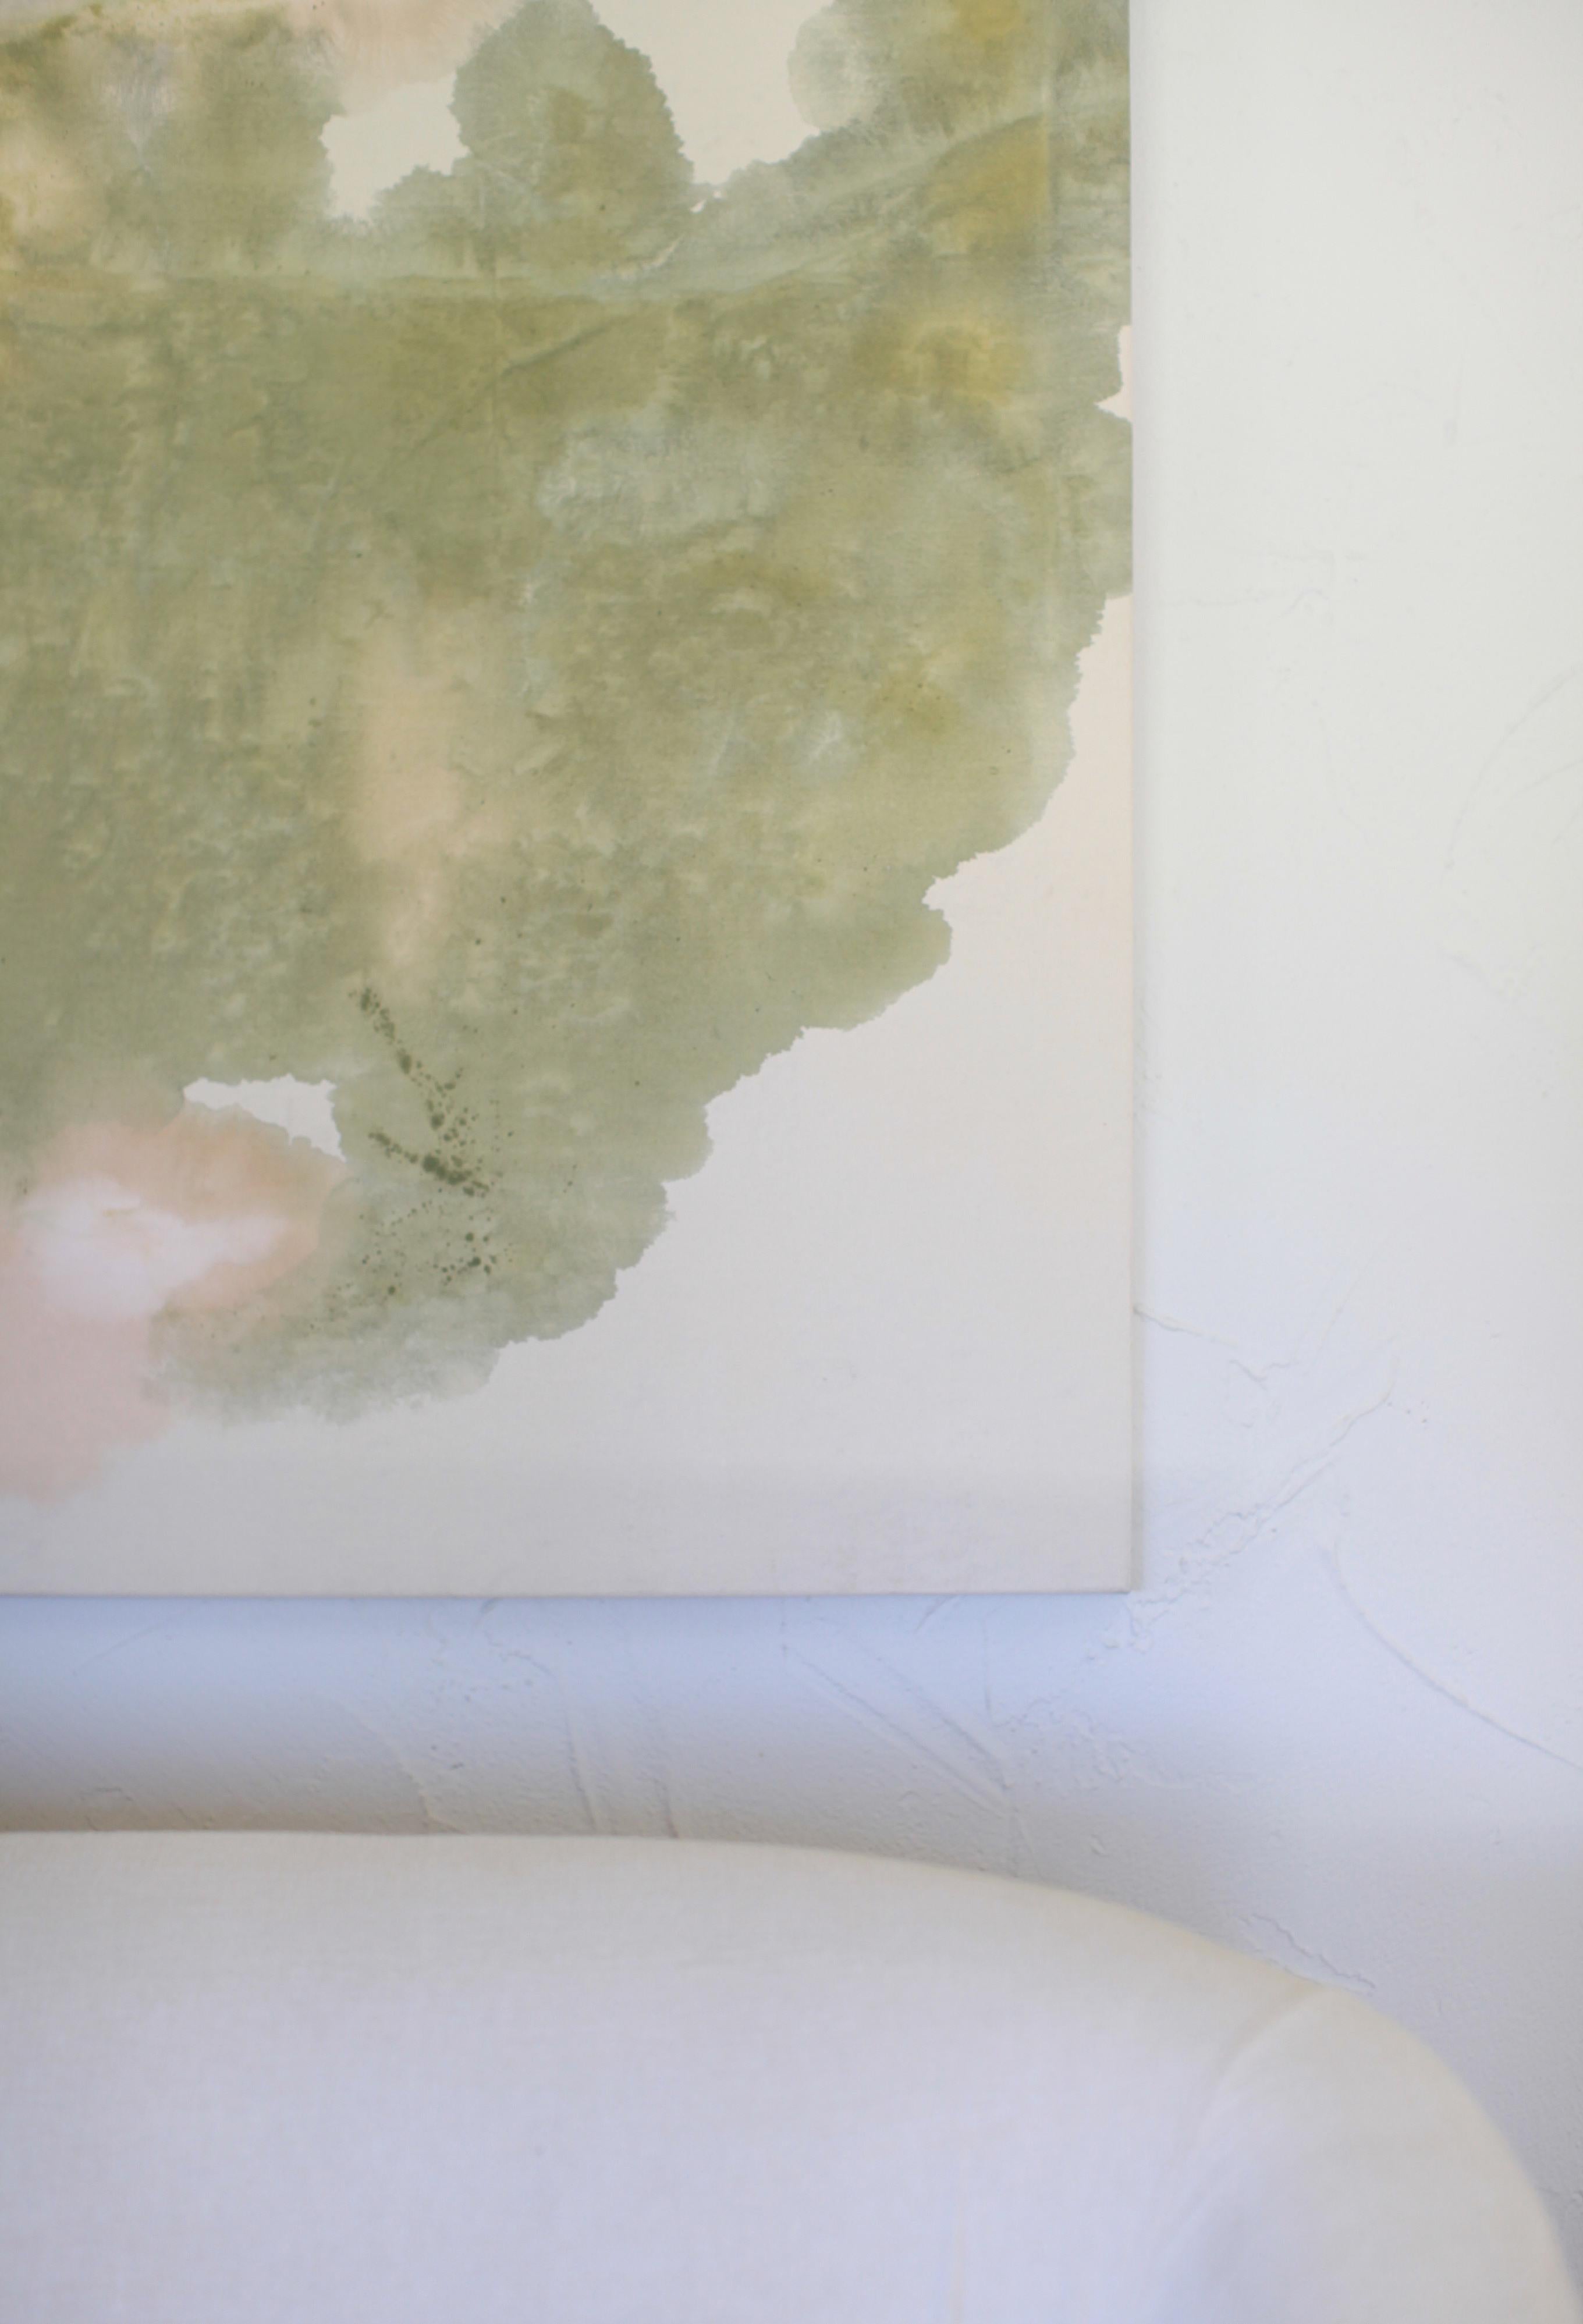 Estuary is a the 14 piece Spring Collection of artist, Brooke Noel Morgan. The series is an exploration in water, softness, and juxtaposition. 